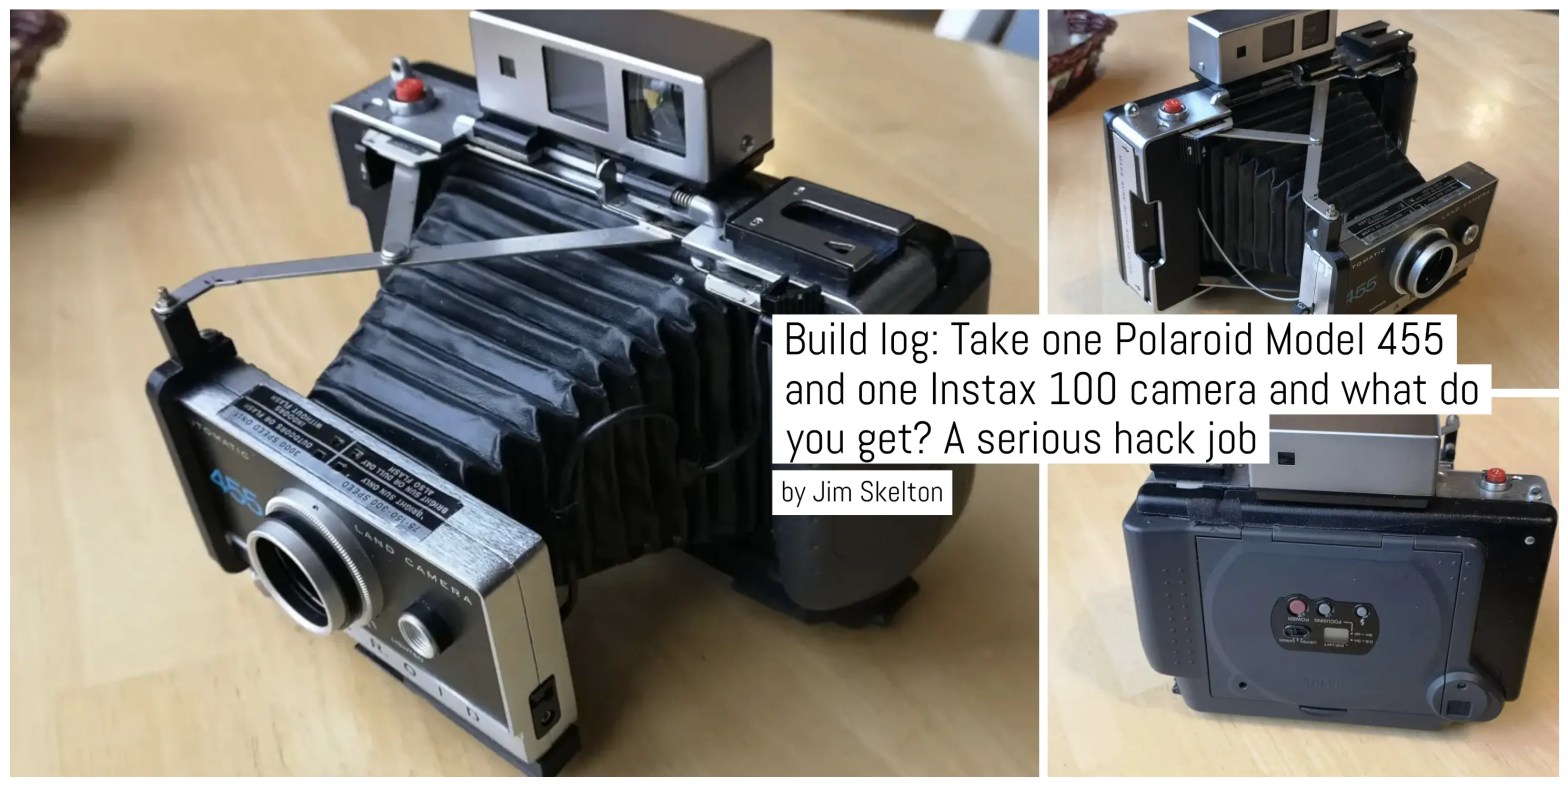 Build log: Take one Polaroid Model 455 and one Instax 100 camera and what do you get? A serious hack job